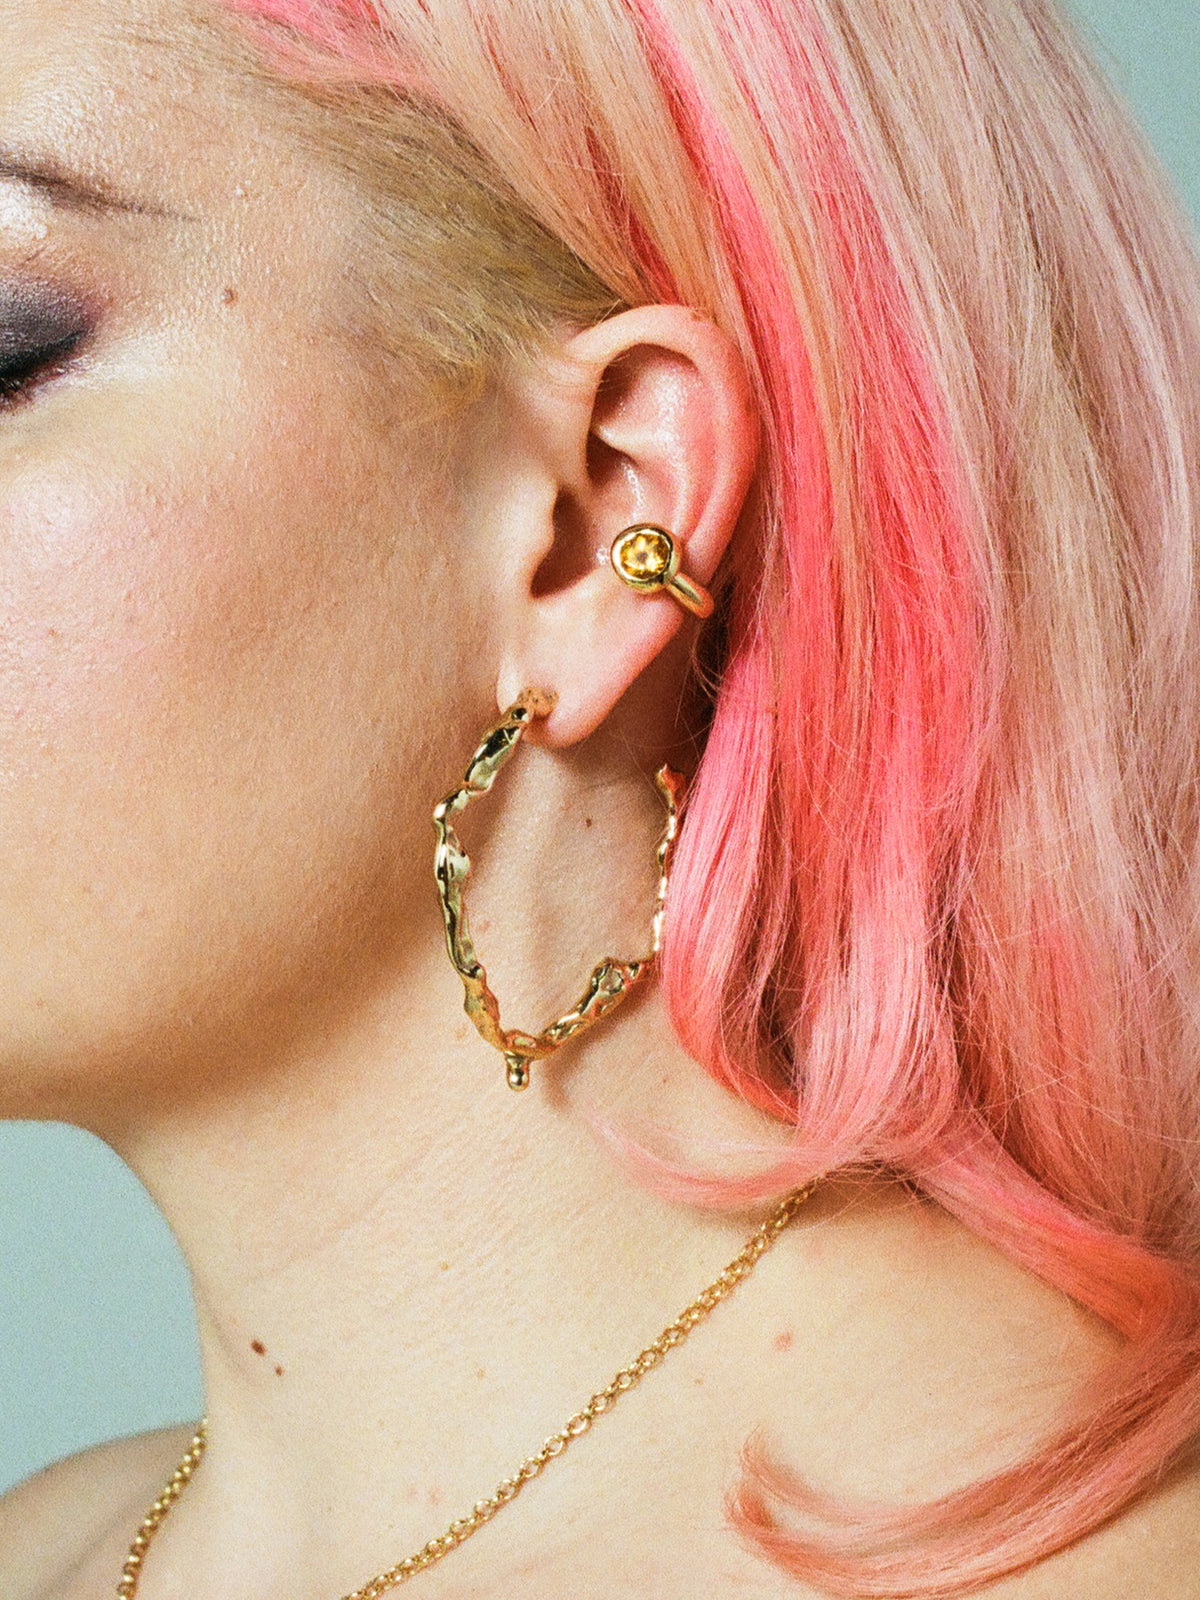 Model wearing FARIS OH Ear Cuff in gold-plated bronze with citrine, styled with DRIP Hoops in gold-plated bronze.